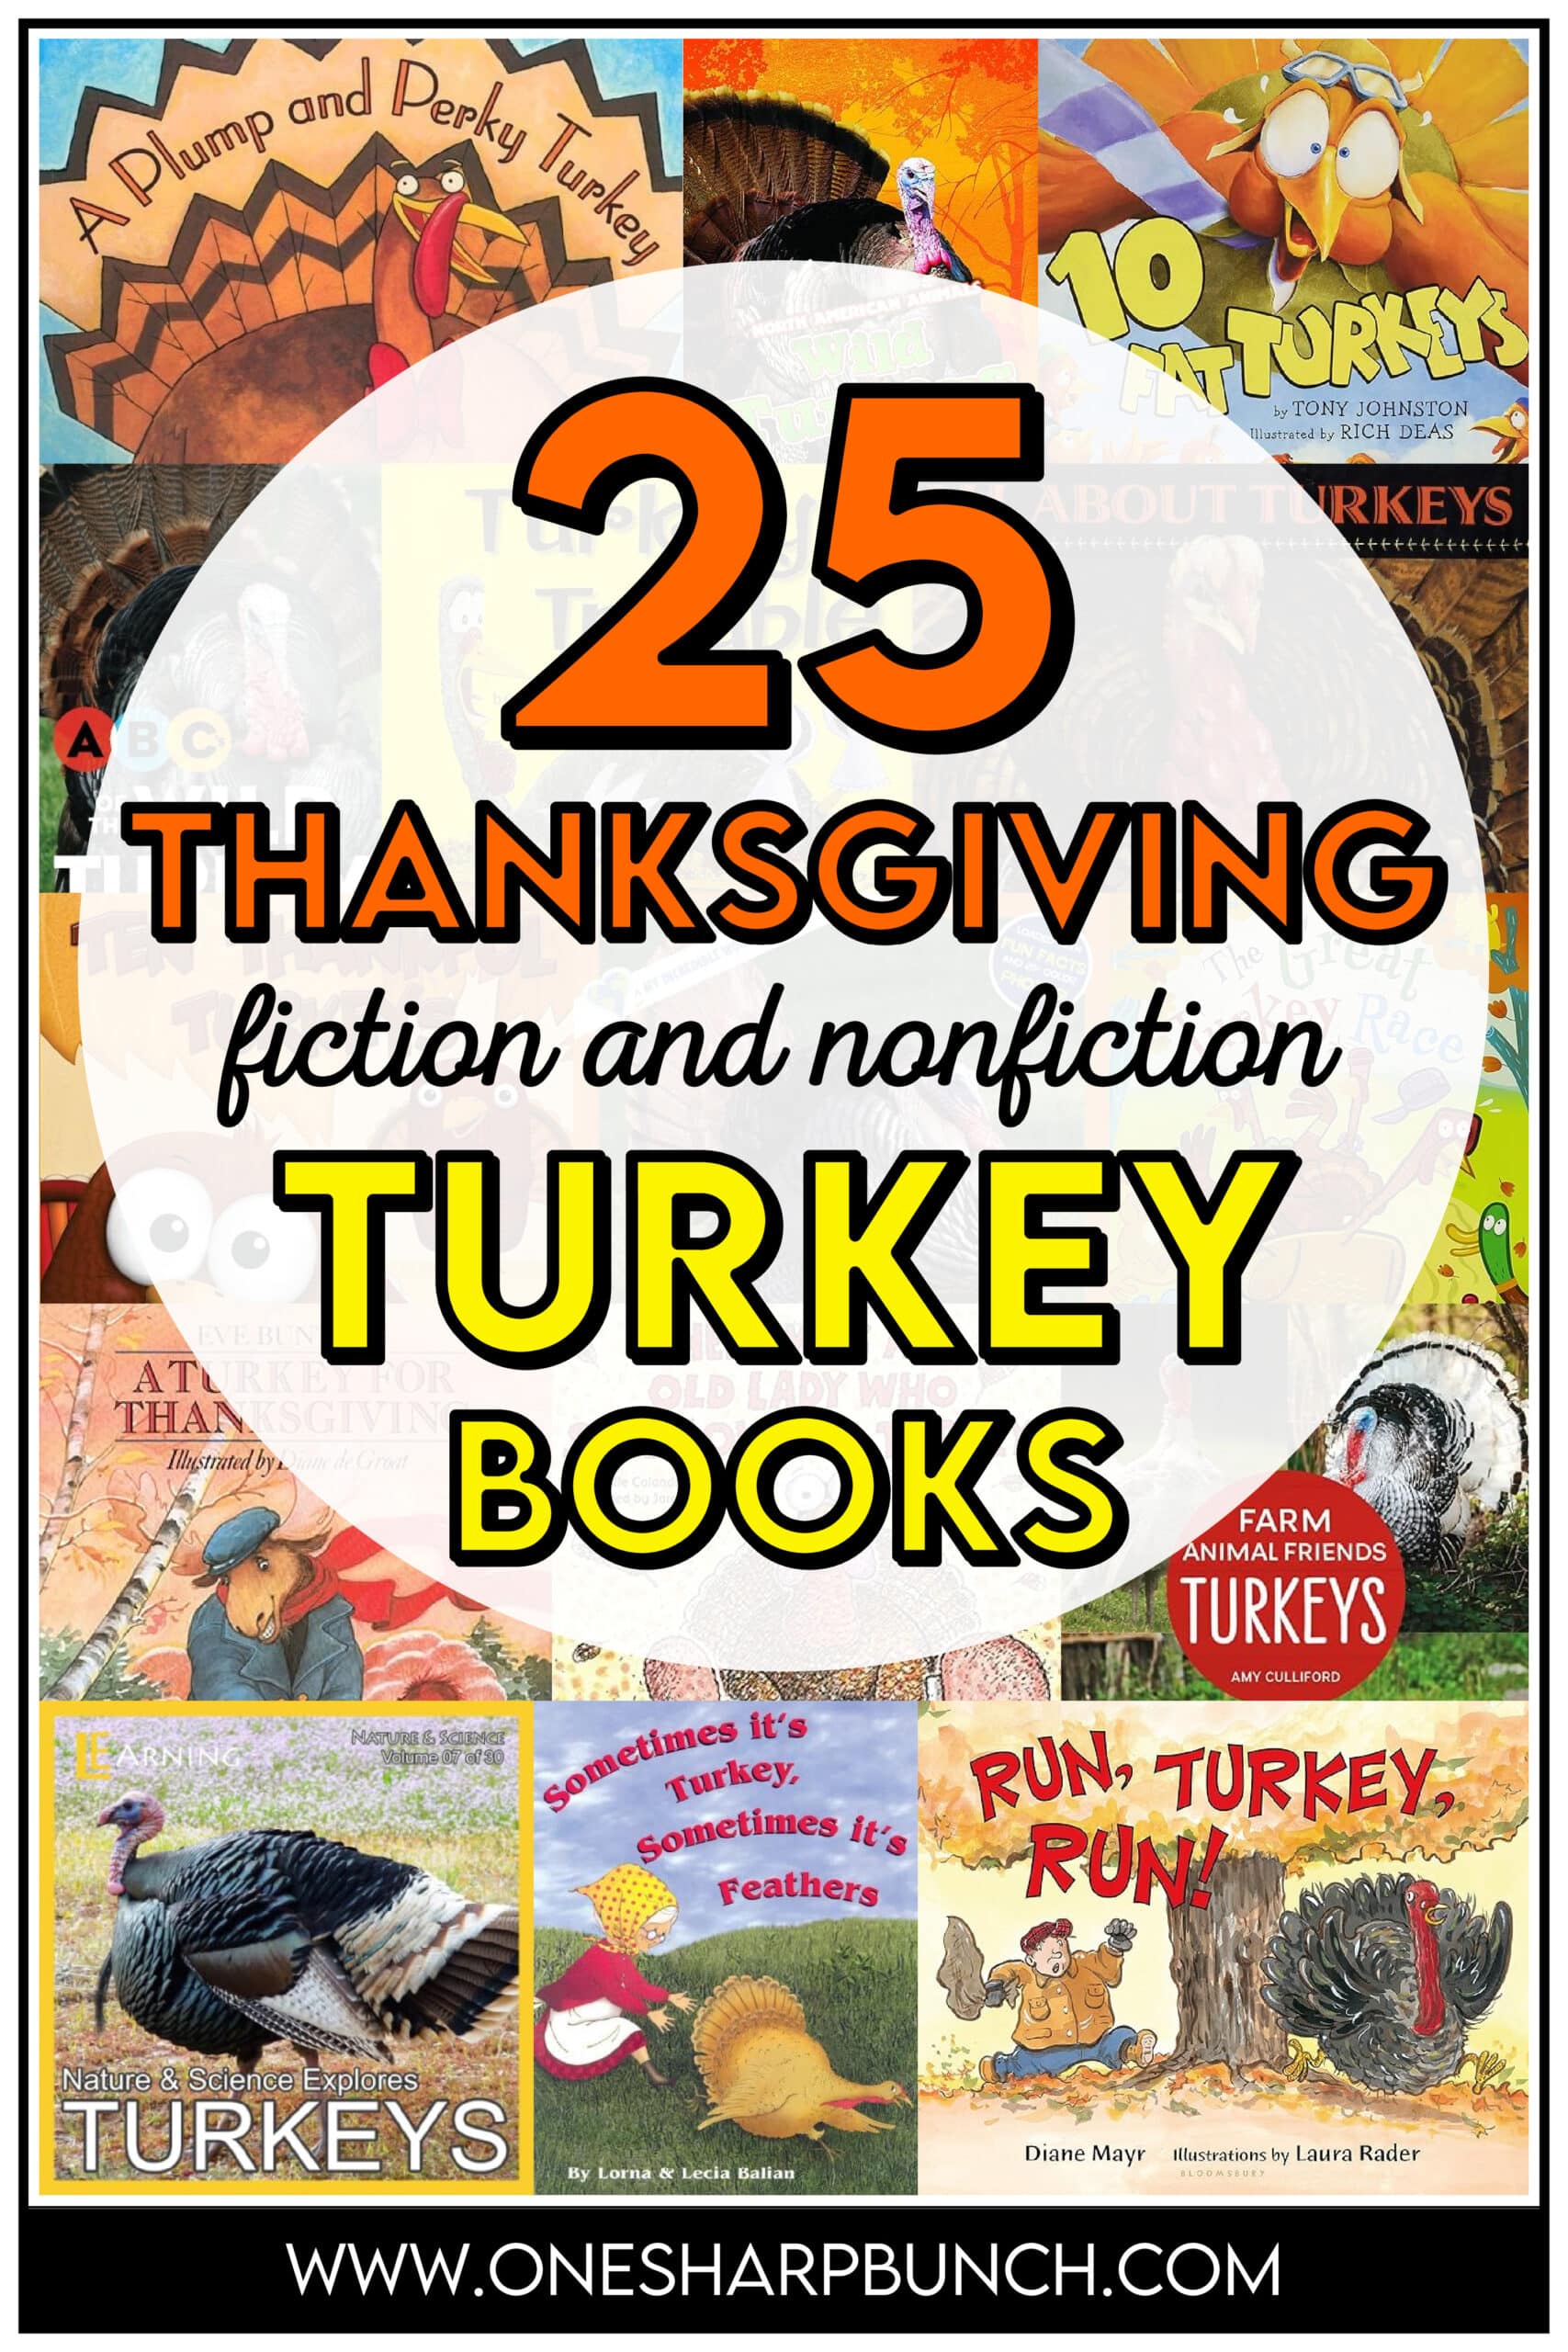 Turkey Books for Kids at Thanksgiving - One Sharp Bunch